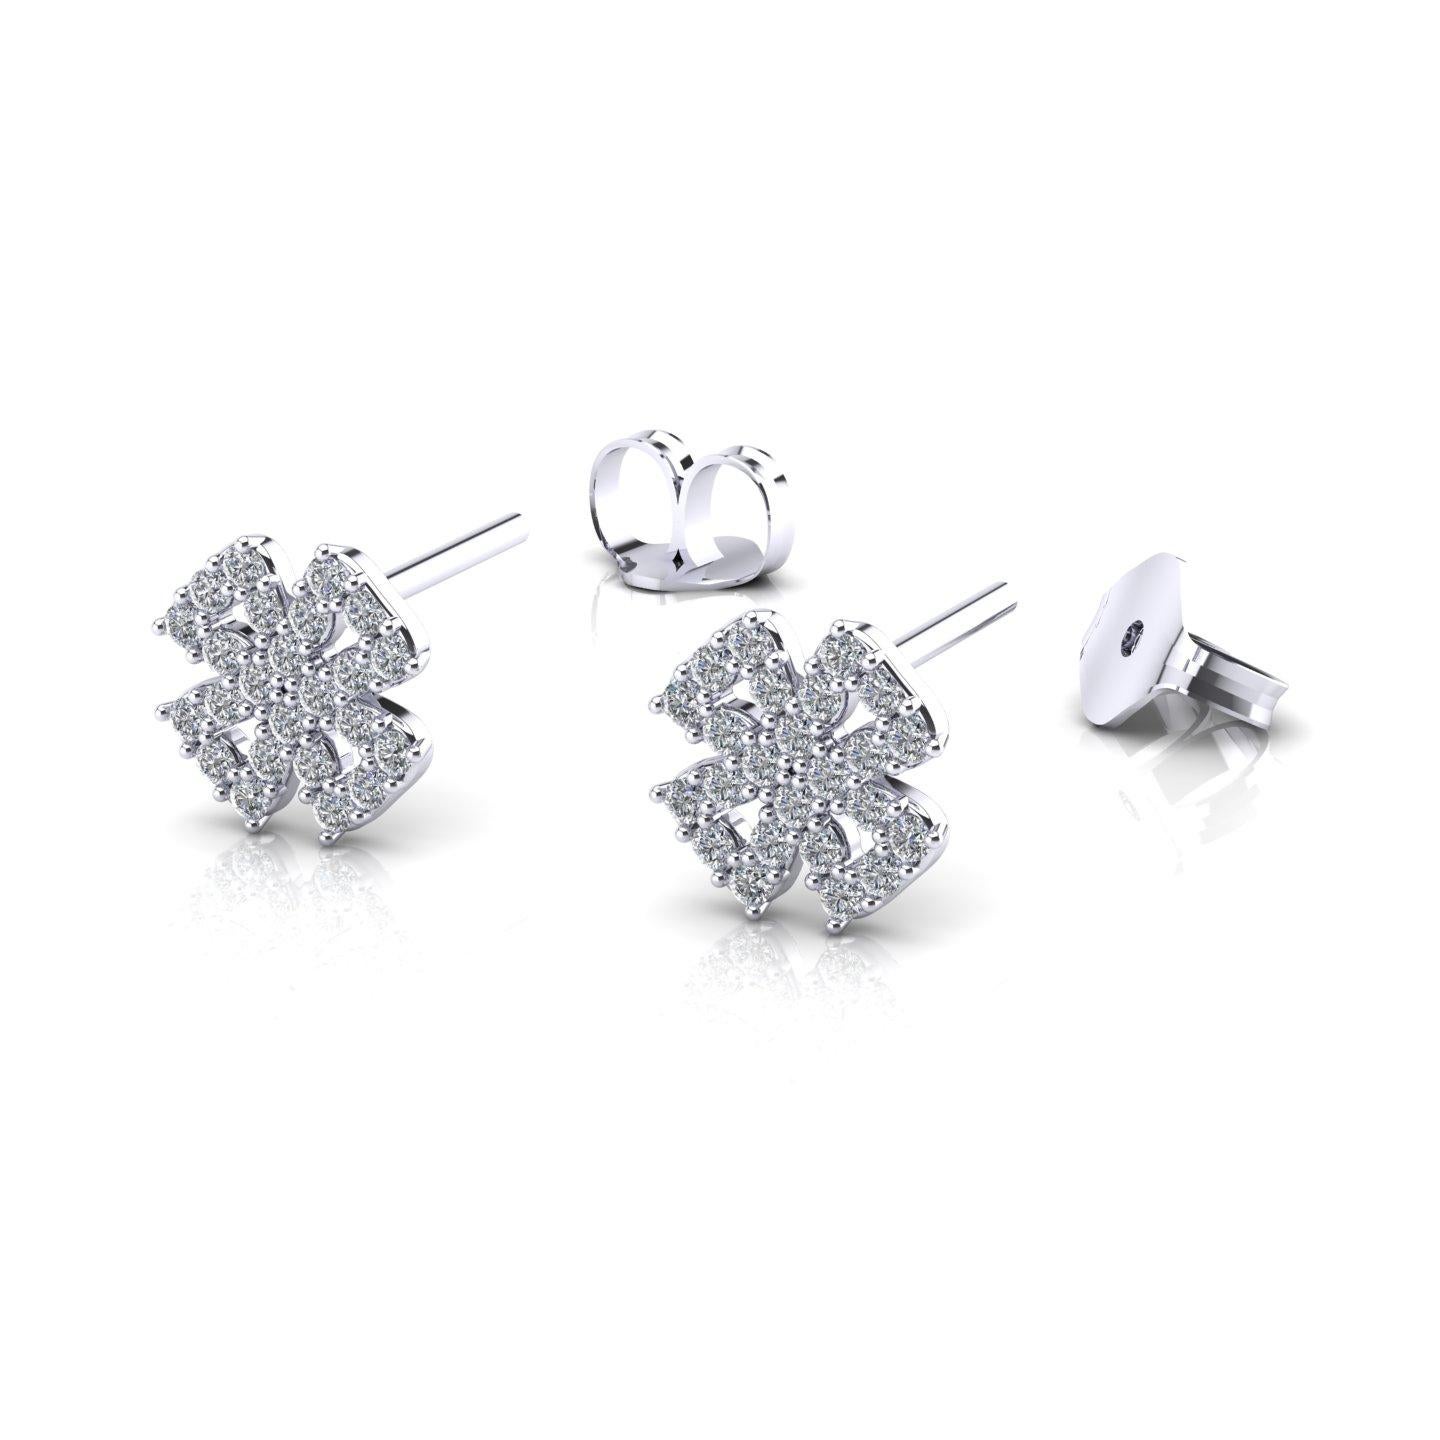 Fantasy Earrings "4leaf" with Natural Diamonds, White Gold 18kt, Made in Italy For Sale